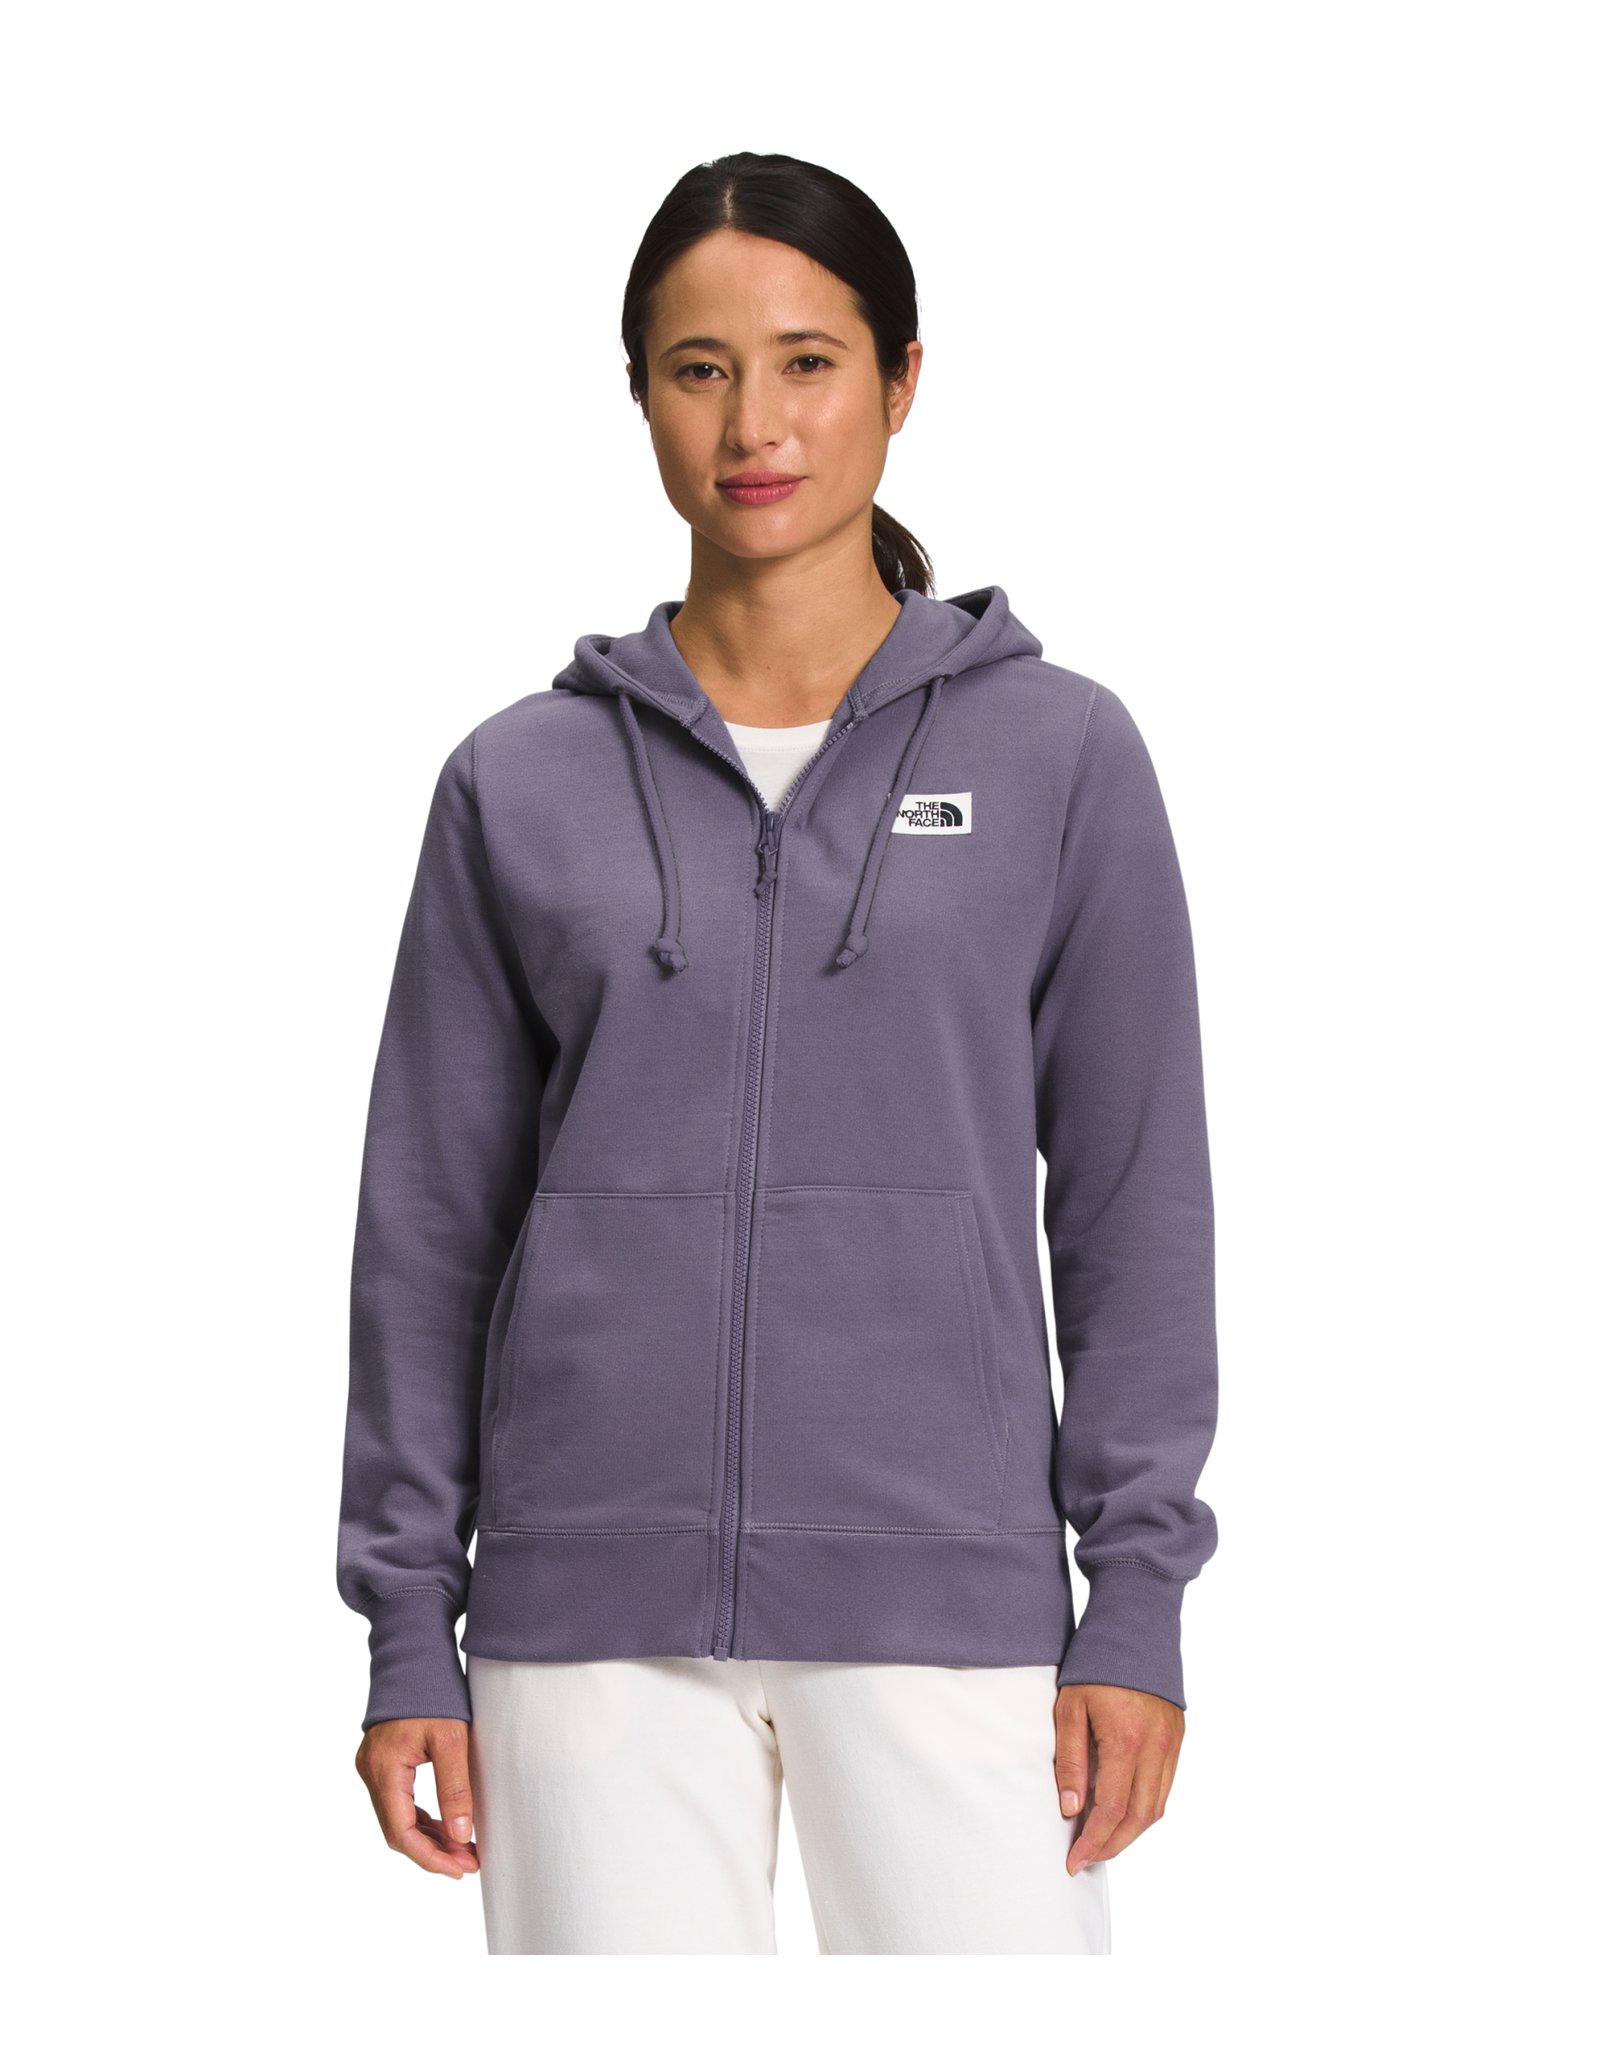 THE NORTH FACE WOMEN'S HERITAGE PATCH FULL ZIP HOODIE